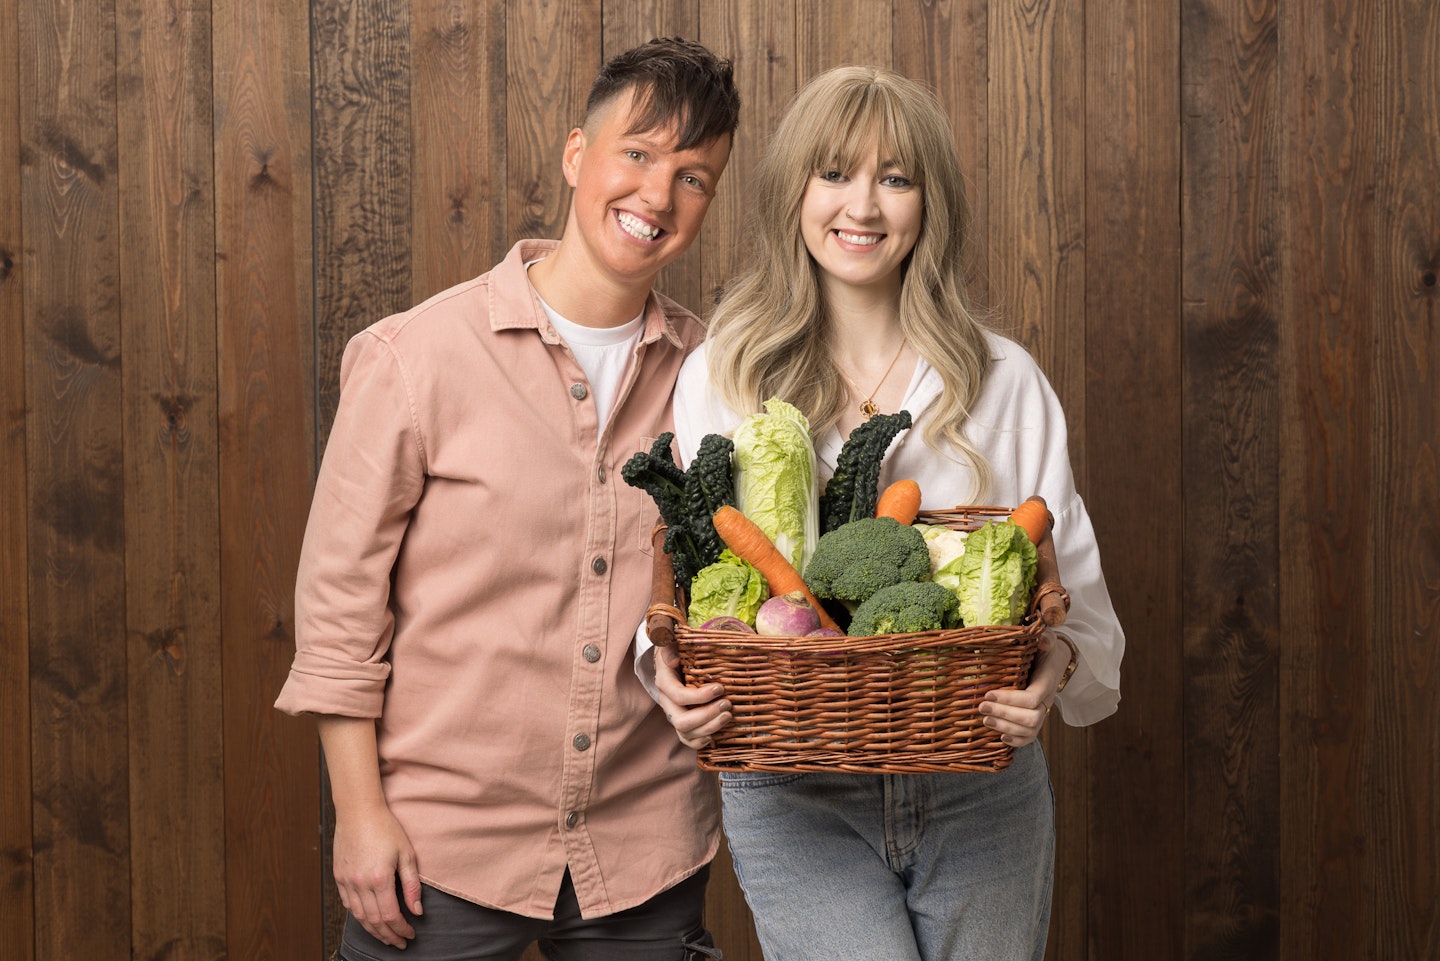 Zoe Clifton and Jenna Robinson holding a basket of vegetables